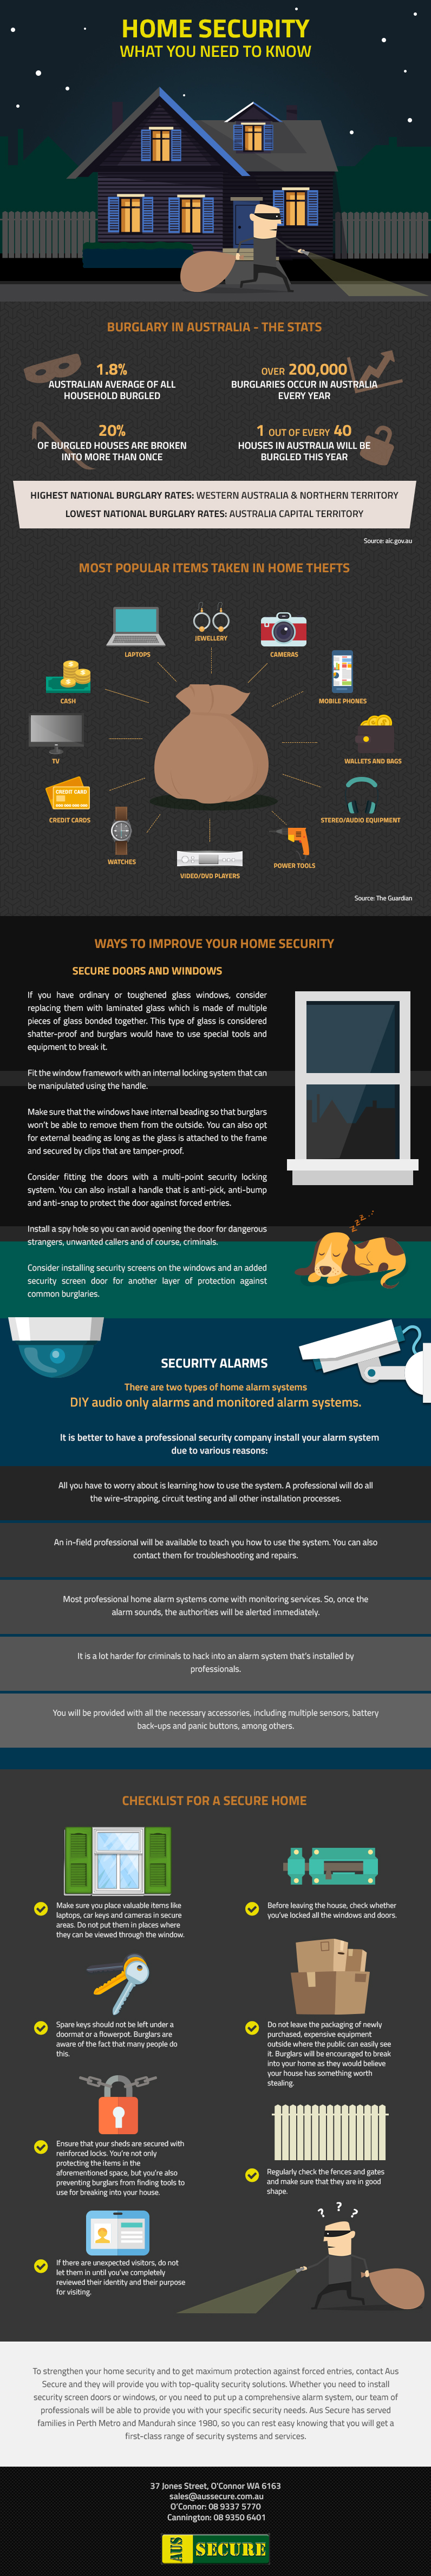 Home Security: What You Need to Know